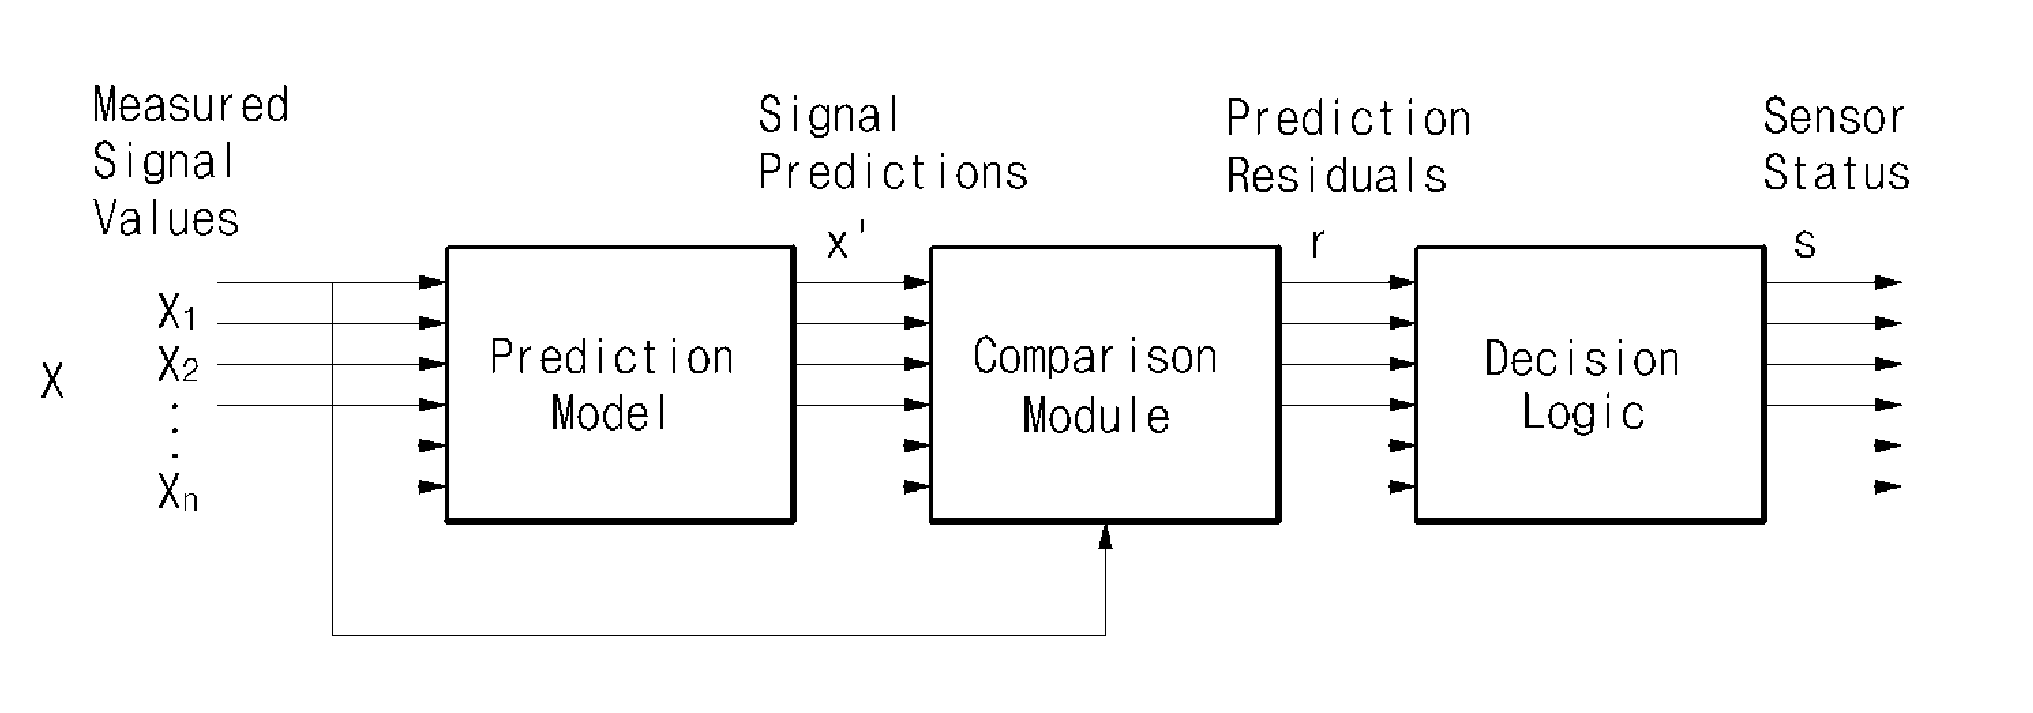 Prediction method for monitoring performance of power plant instruments